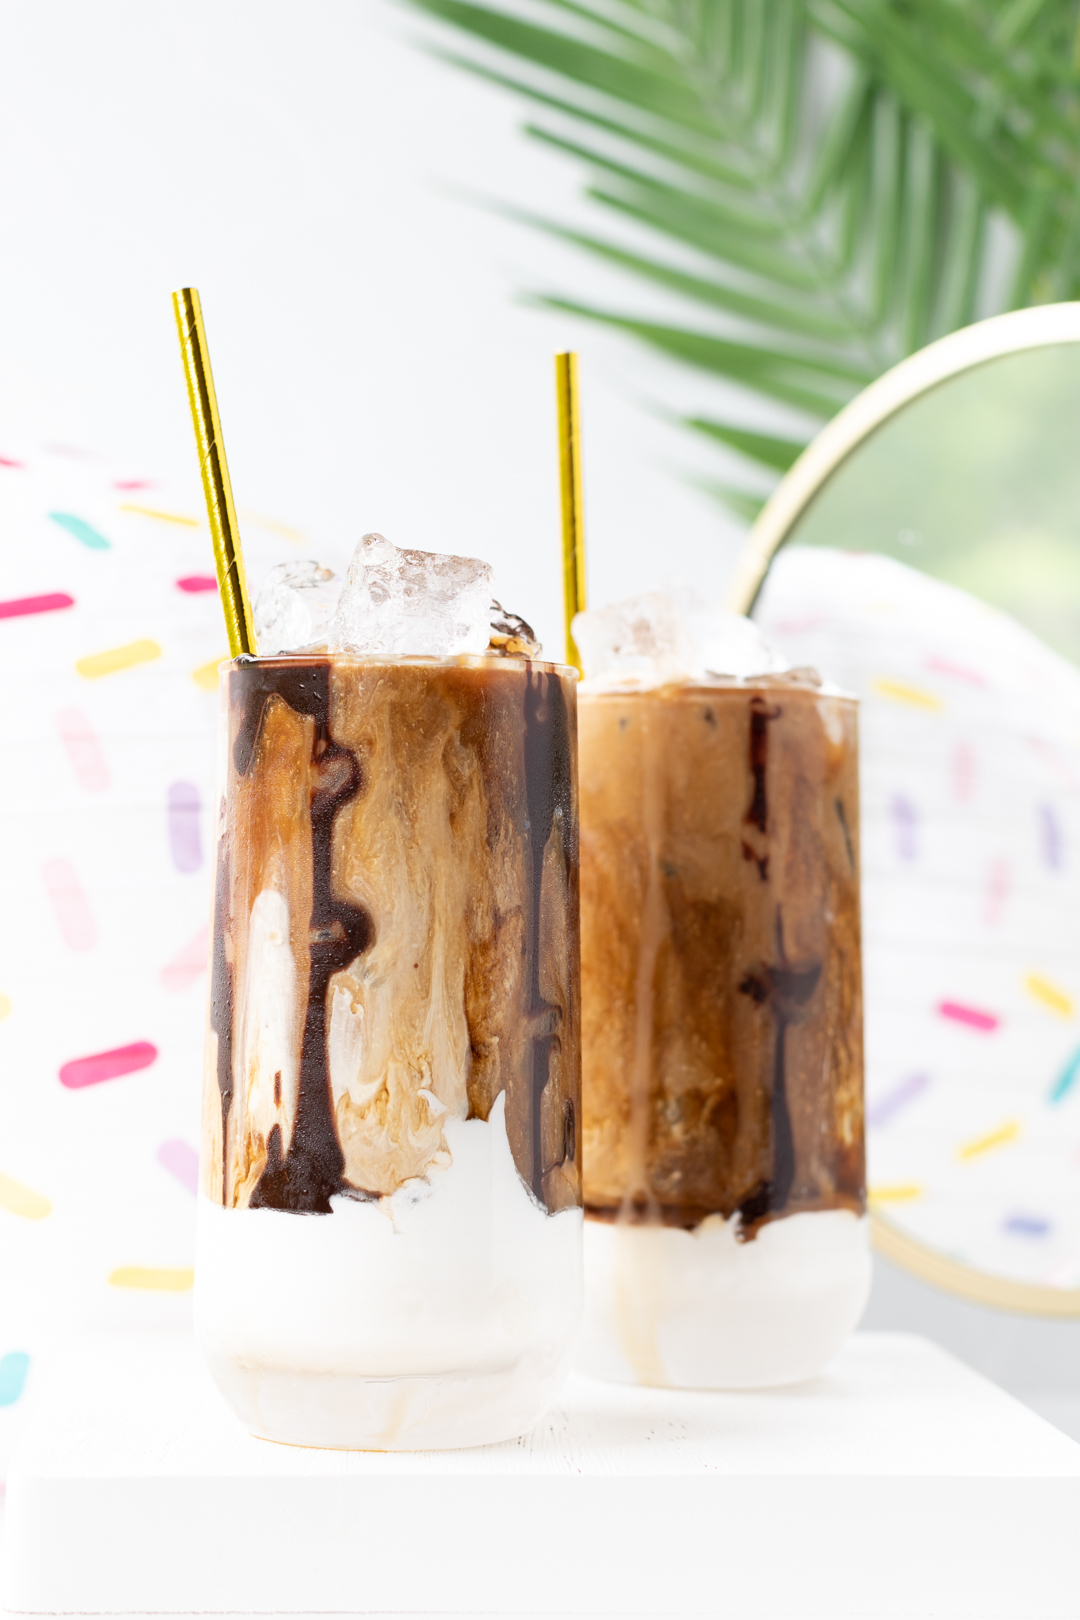 up close view of upside down iced coffee with chocolate drizzle and gold paper straws